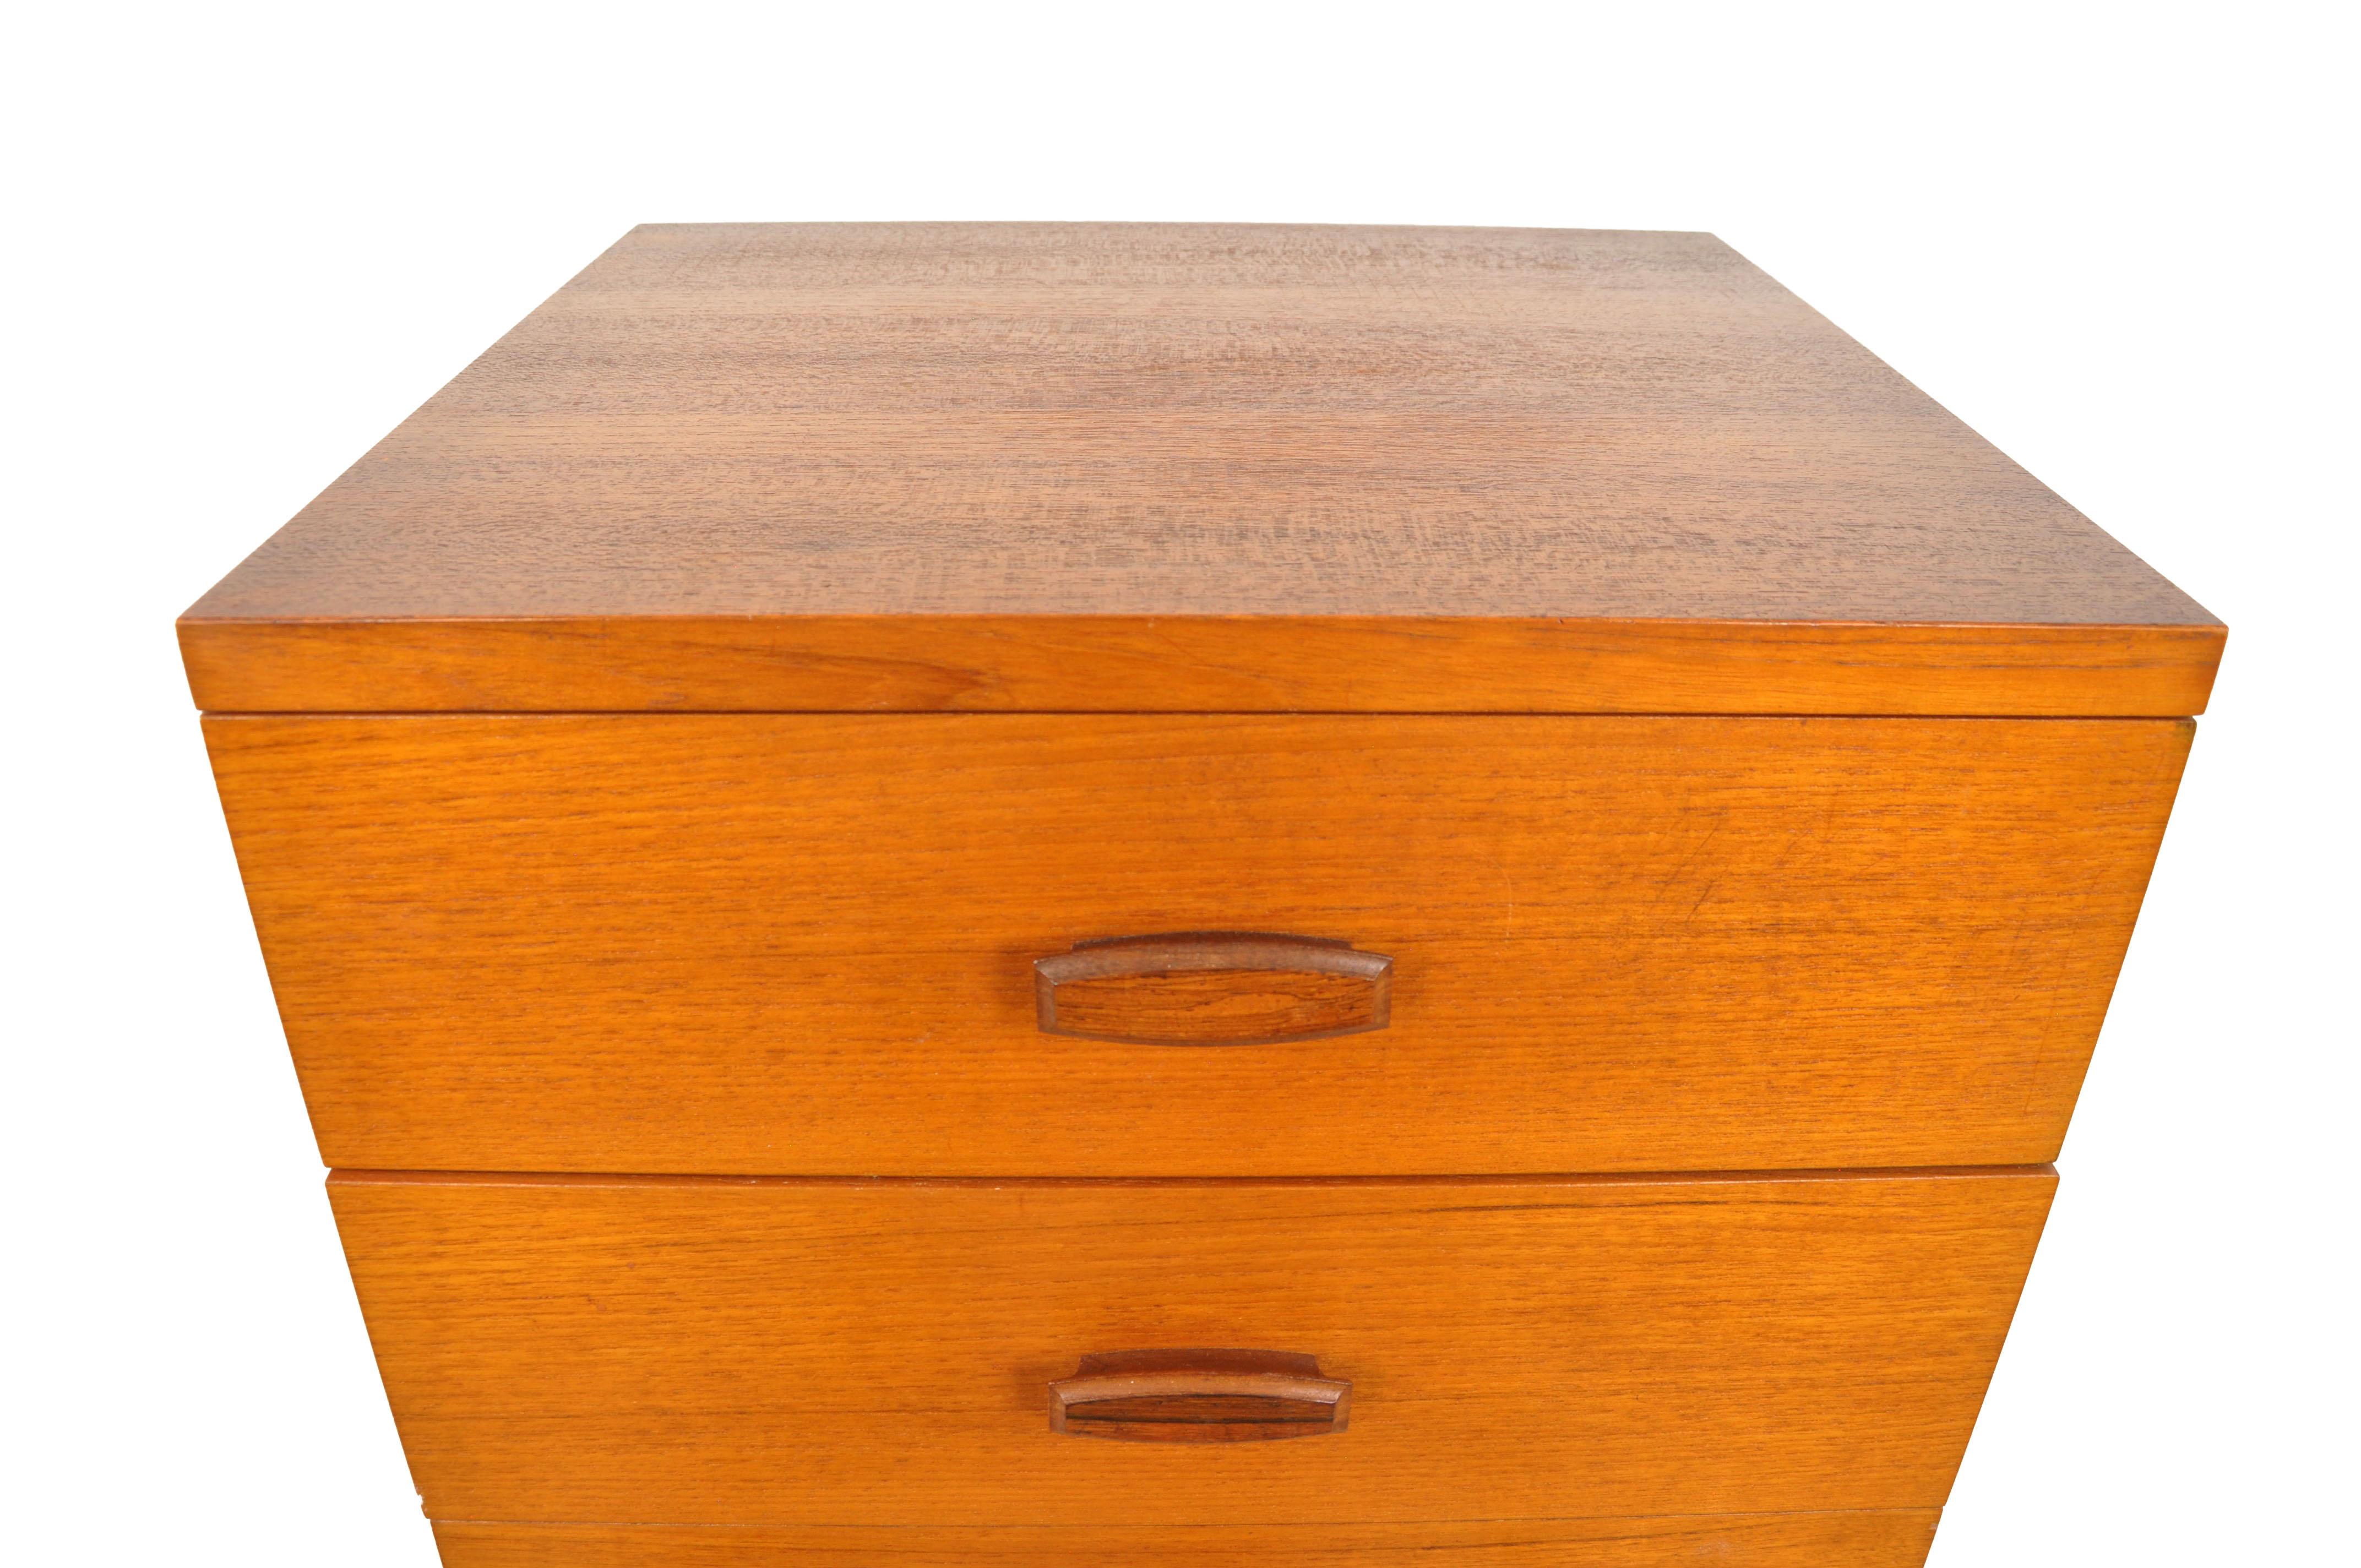 Mid-Century Modern chest of drawers dresser by G-Plan, England, circa 1965. Kofod Larson, designer.
Strong Danish modern influence, made in beautiful teak with hardwood handles. Super High Quality. This is an authentic Mid-Century Modern piece of